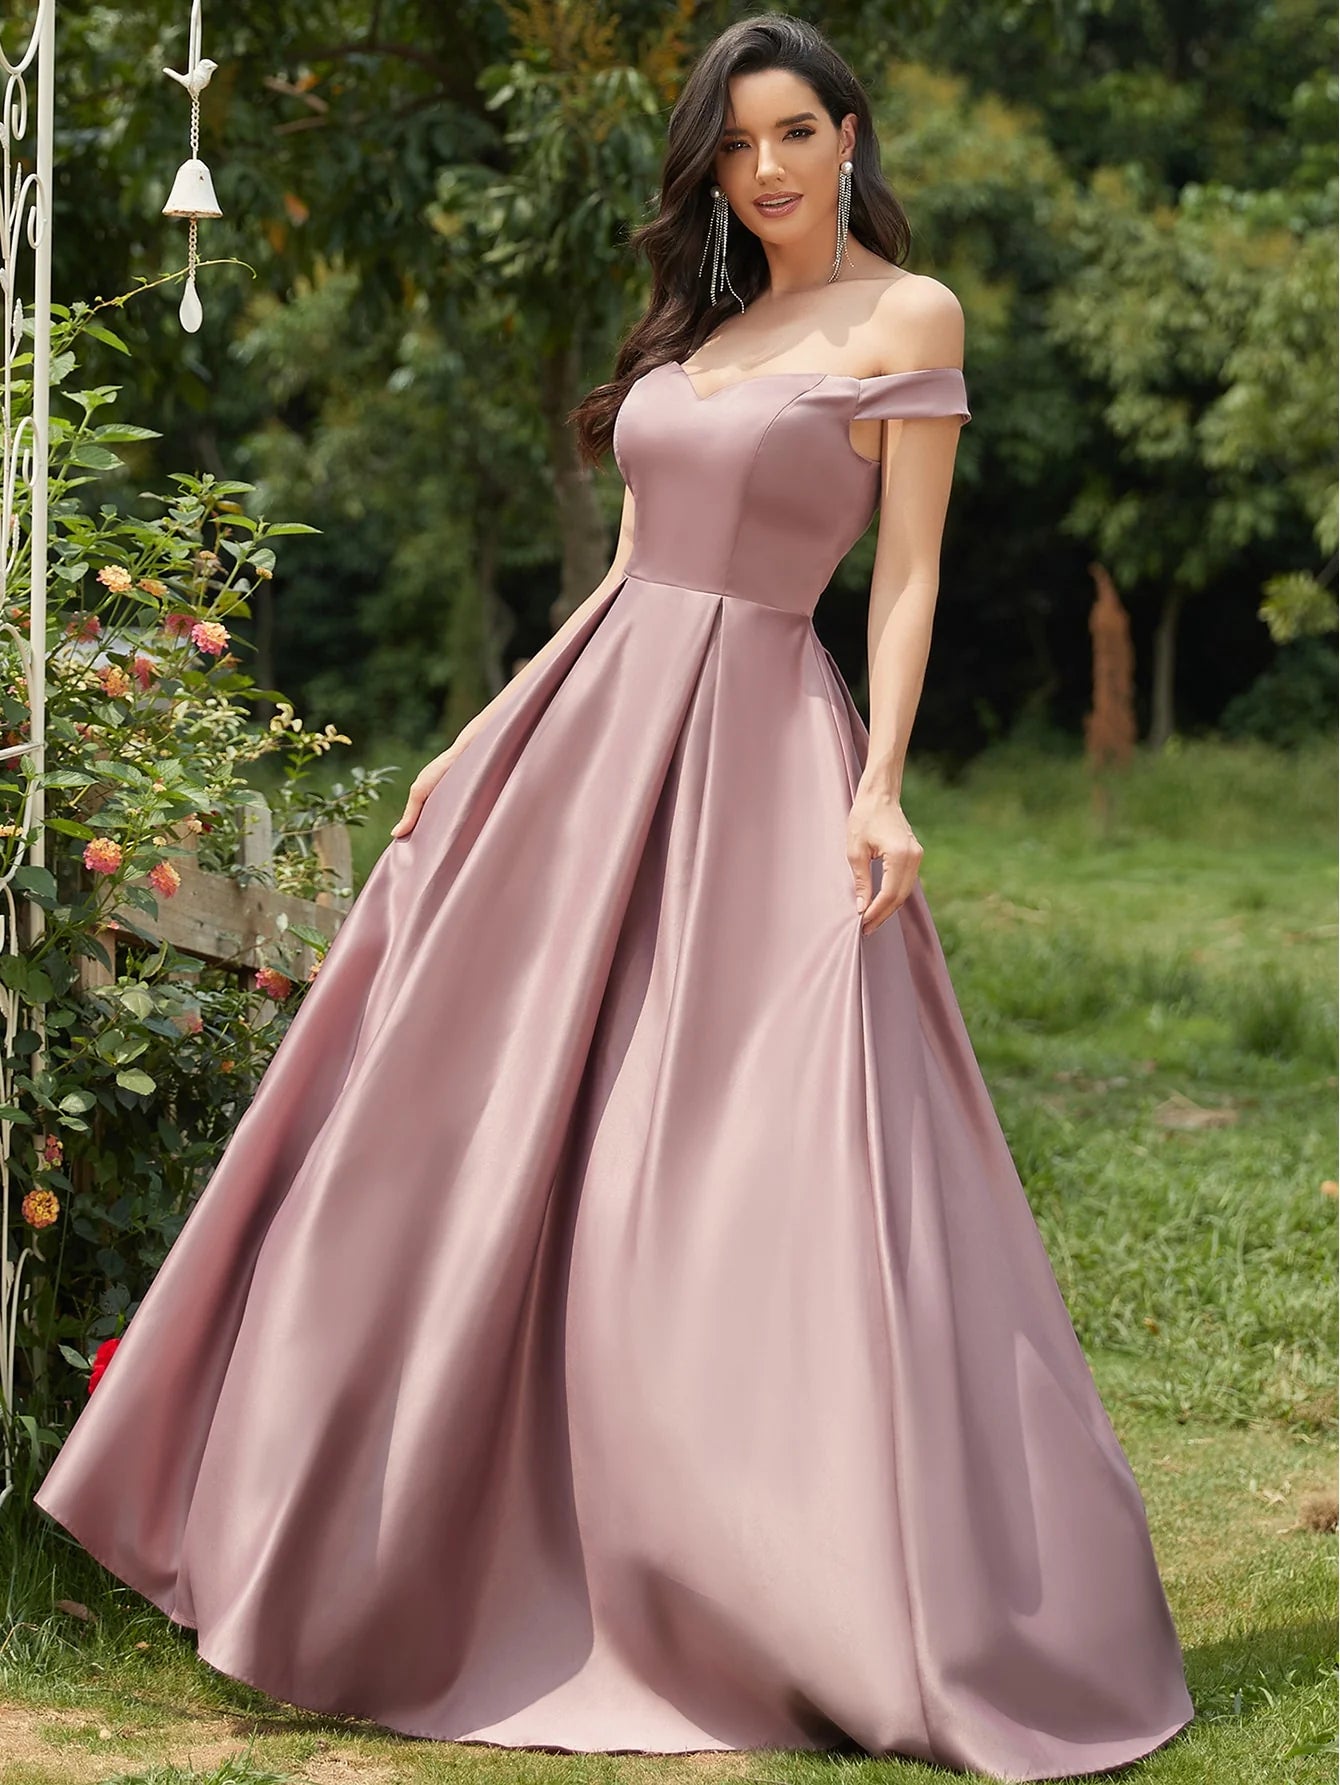 Off Shoulder Boxy Pleated Satin Prom Dress